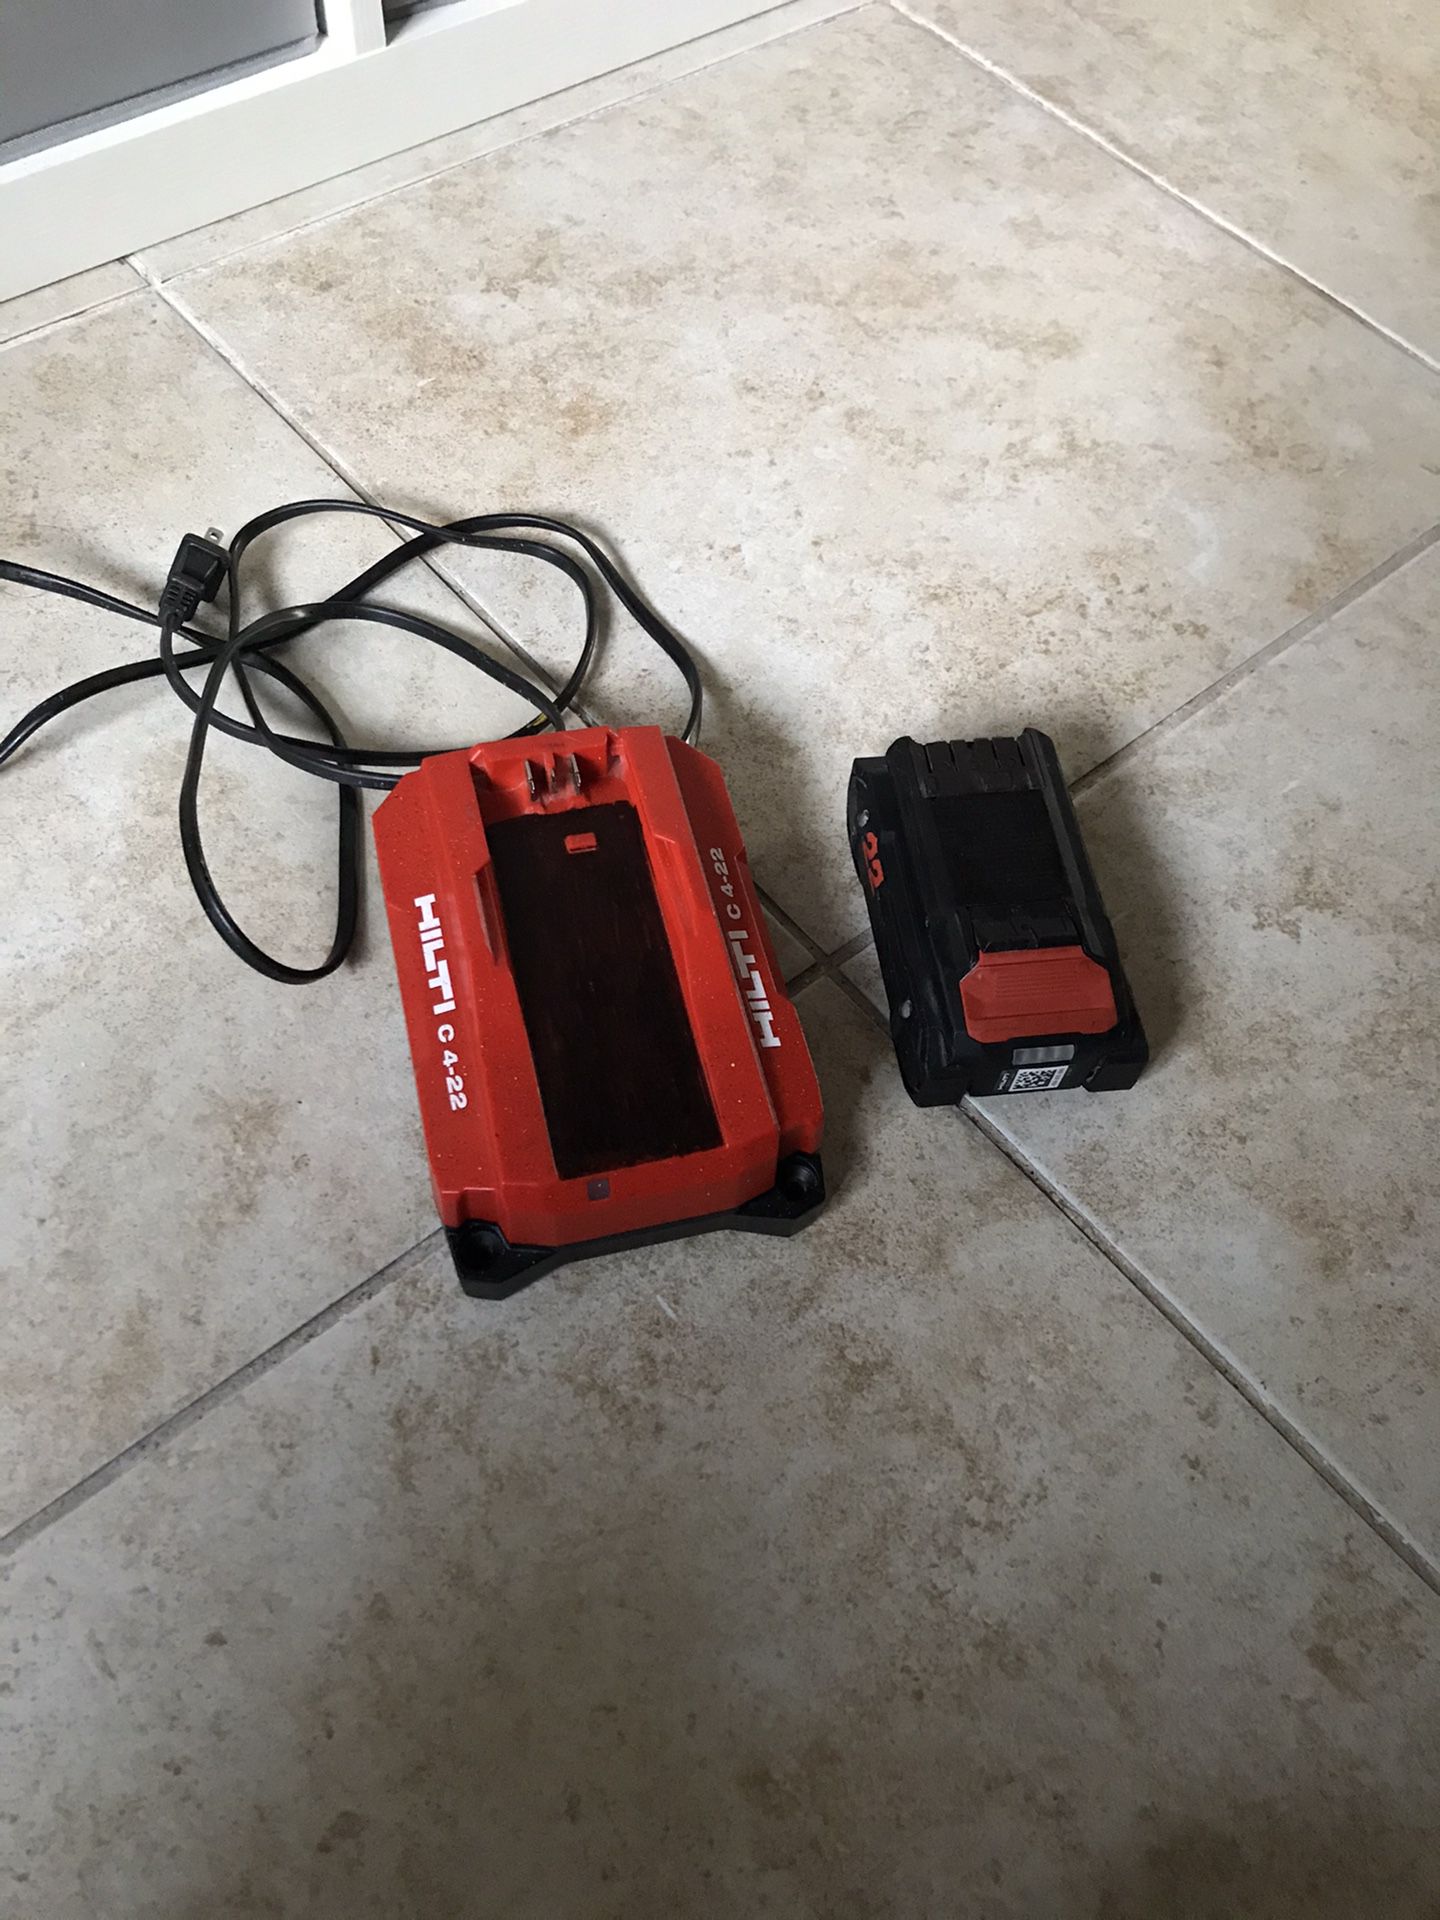 Hilti Battery And Charger 